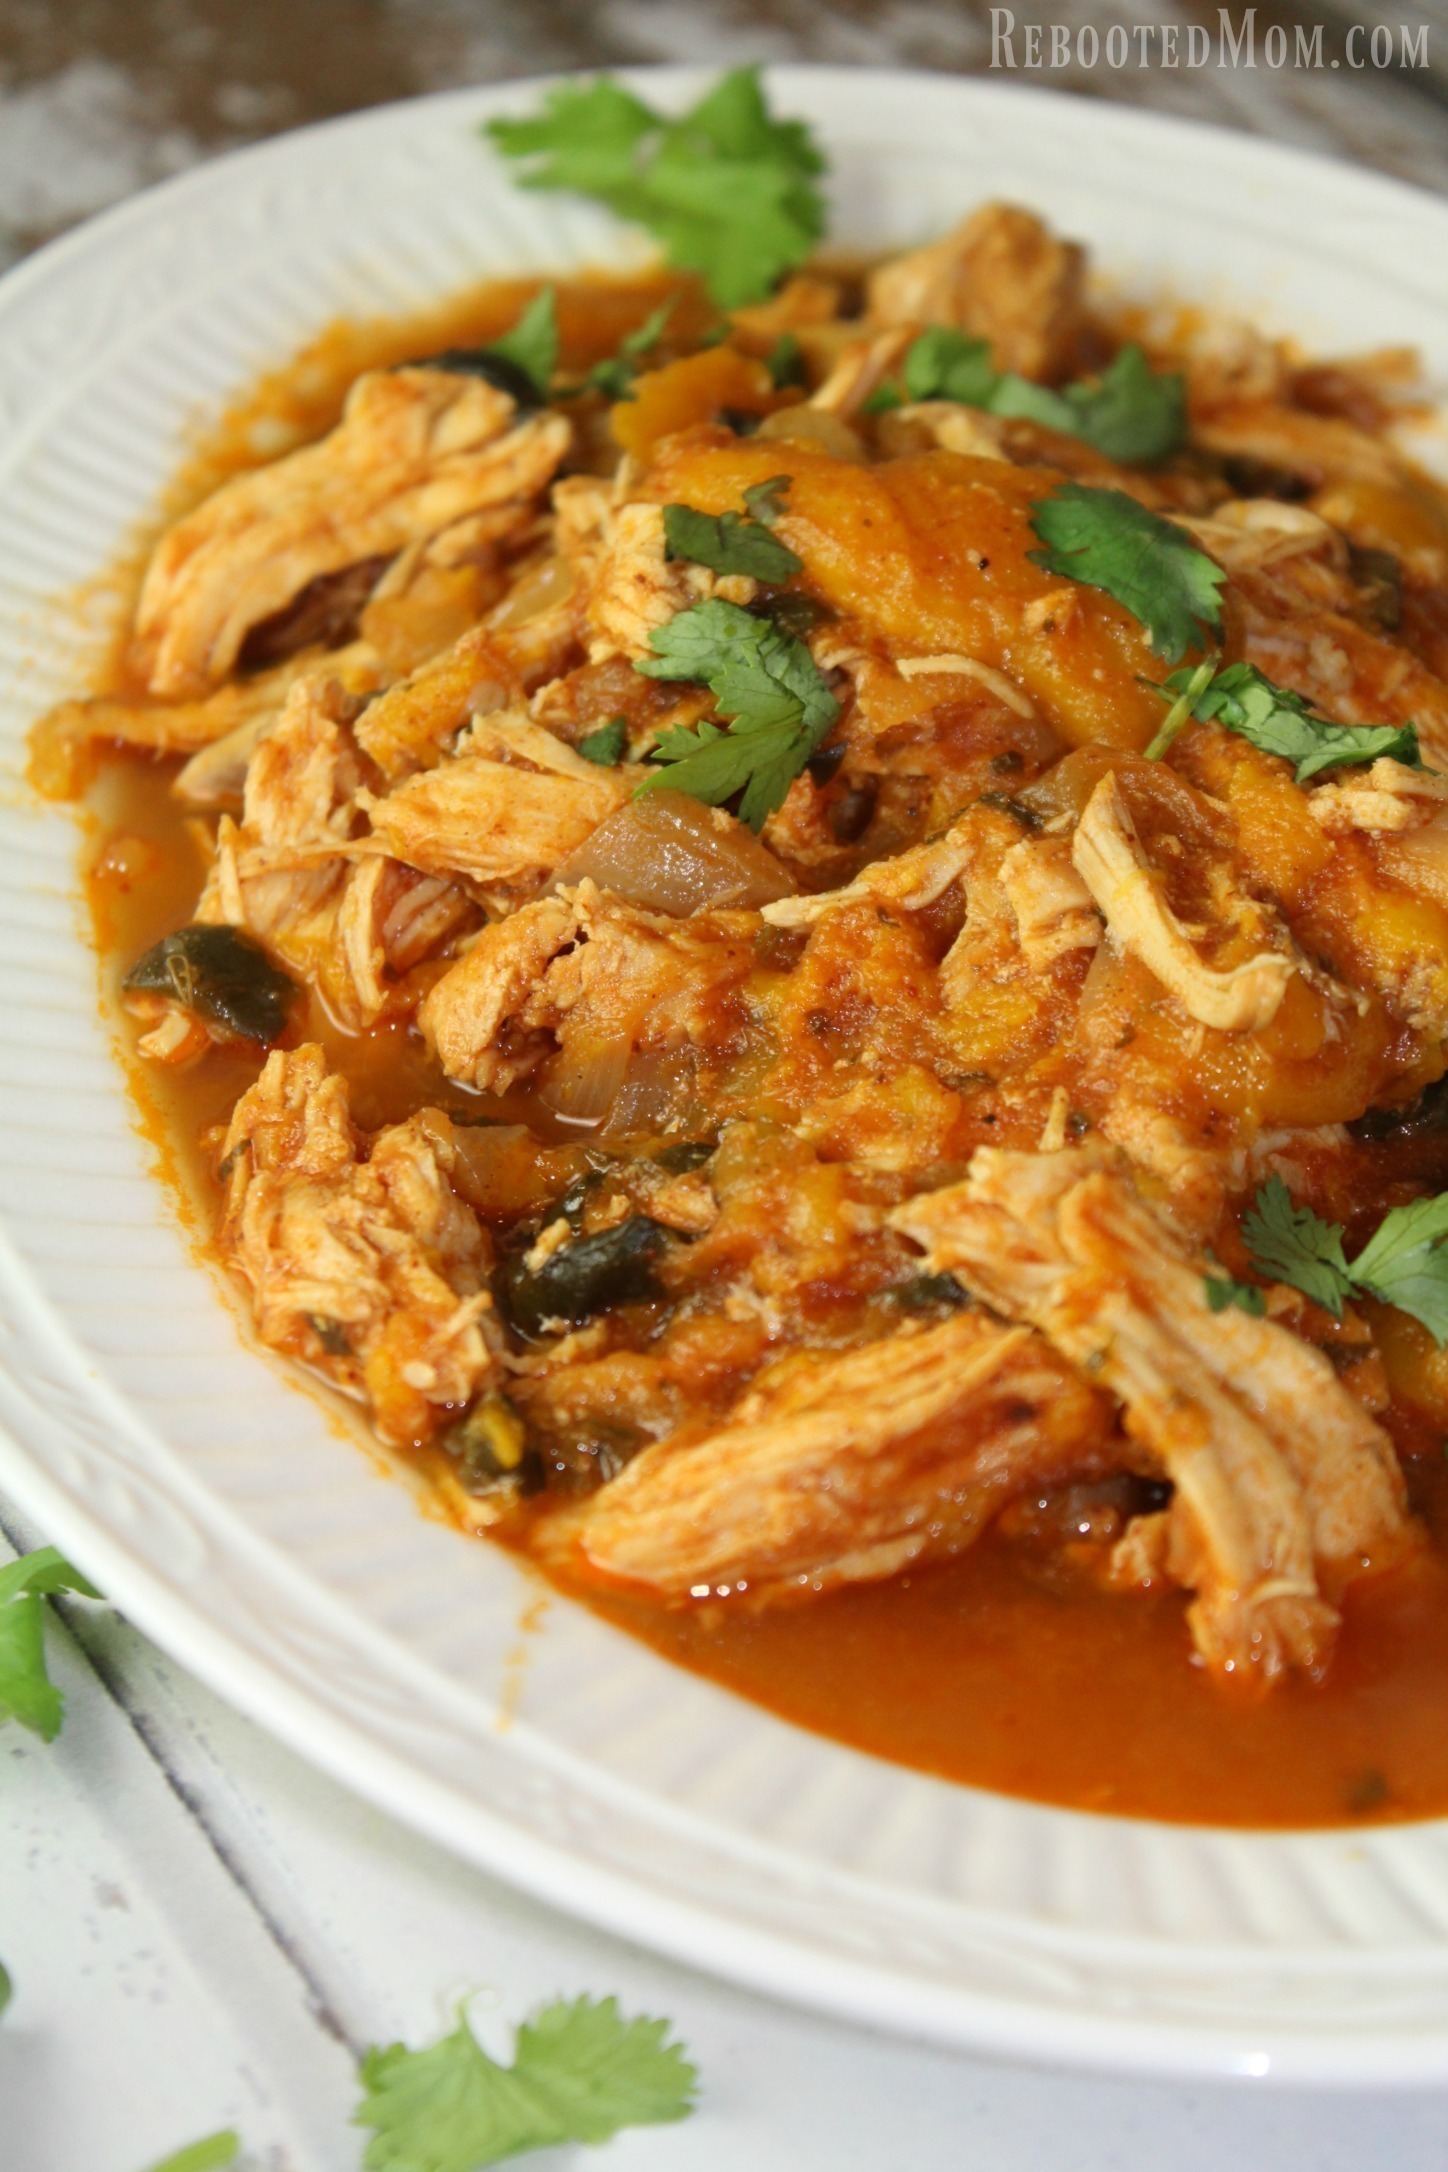 This Mango Lime Pulled Chicken is a one pot meal of shredded chicken that bathes in a fiery sauce of mangoes, tomatoes, and spices that's wonderful served over rice.